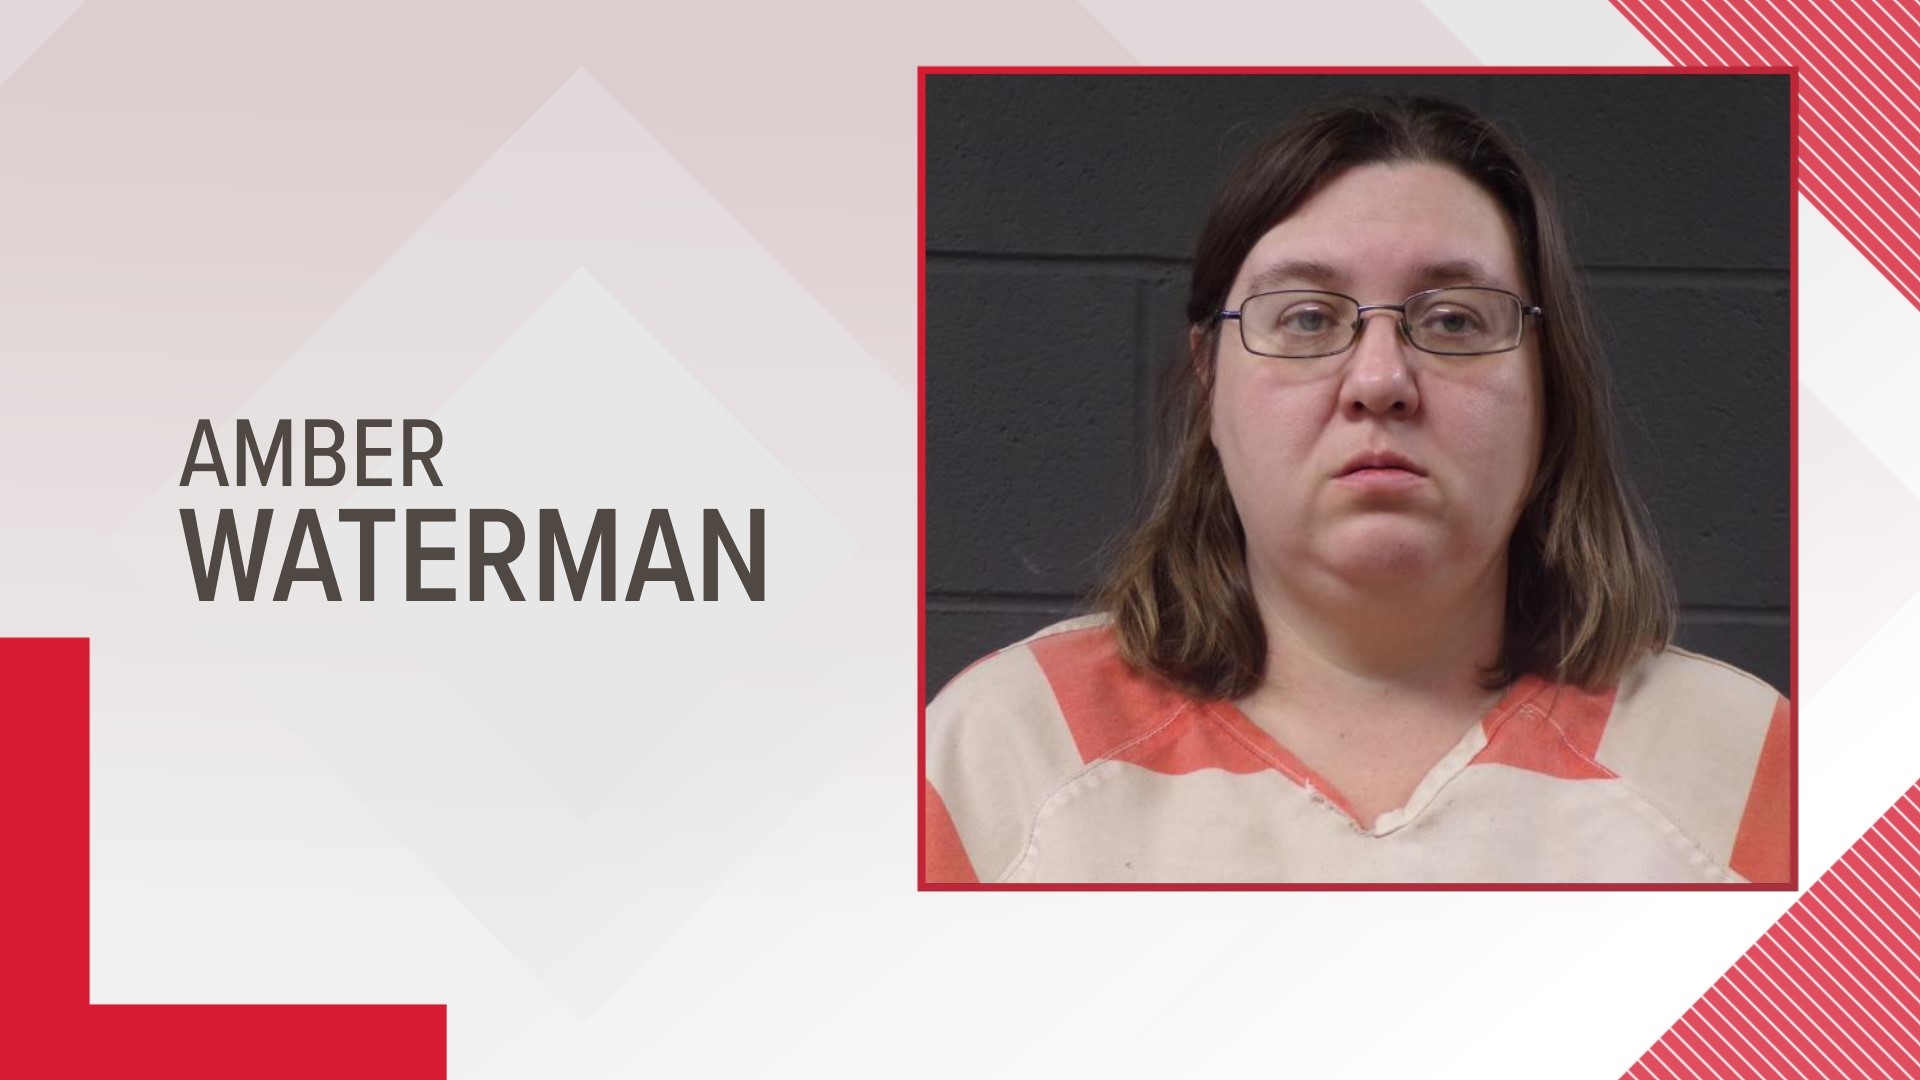 Amber Waterman is already facing charges in federal court in Missouri for the death of Ashley Bush and her unborn child.